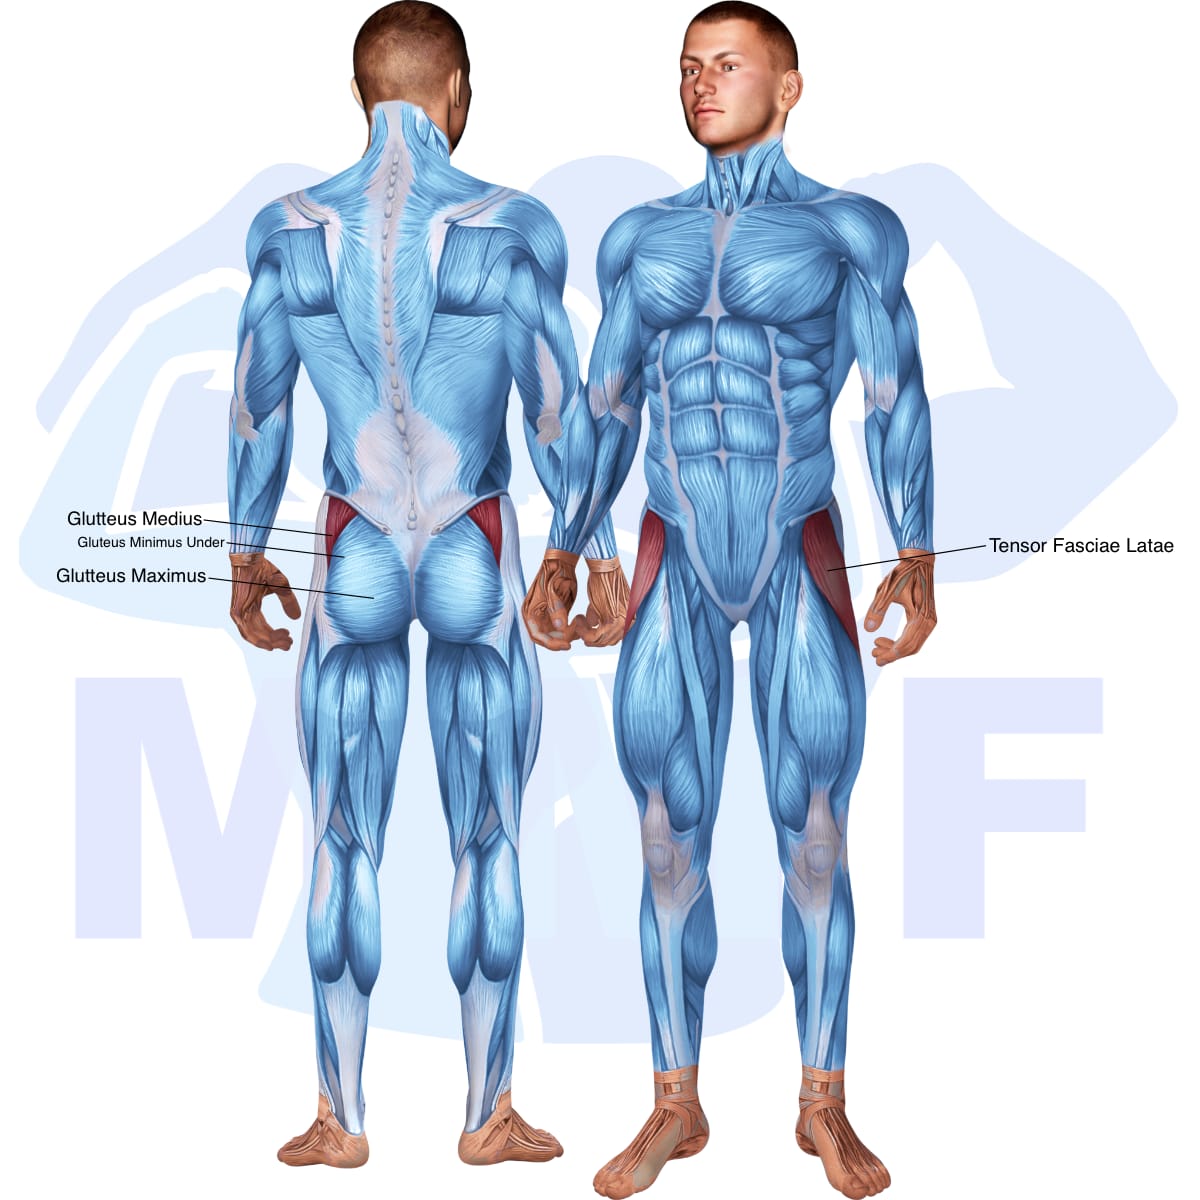 Image of the skeletal muscular system with the muscles used in the lever seated hip abduction exercise highlighted in red and the rest in blue.